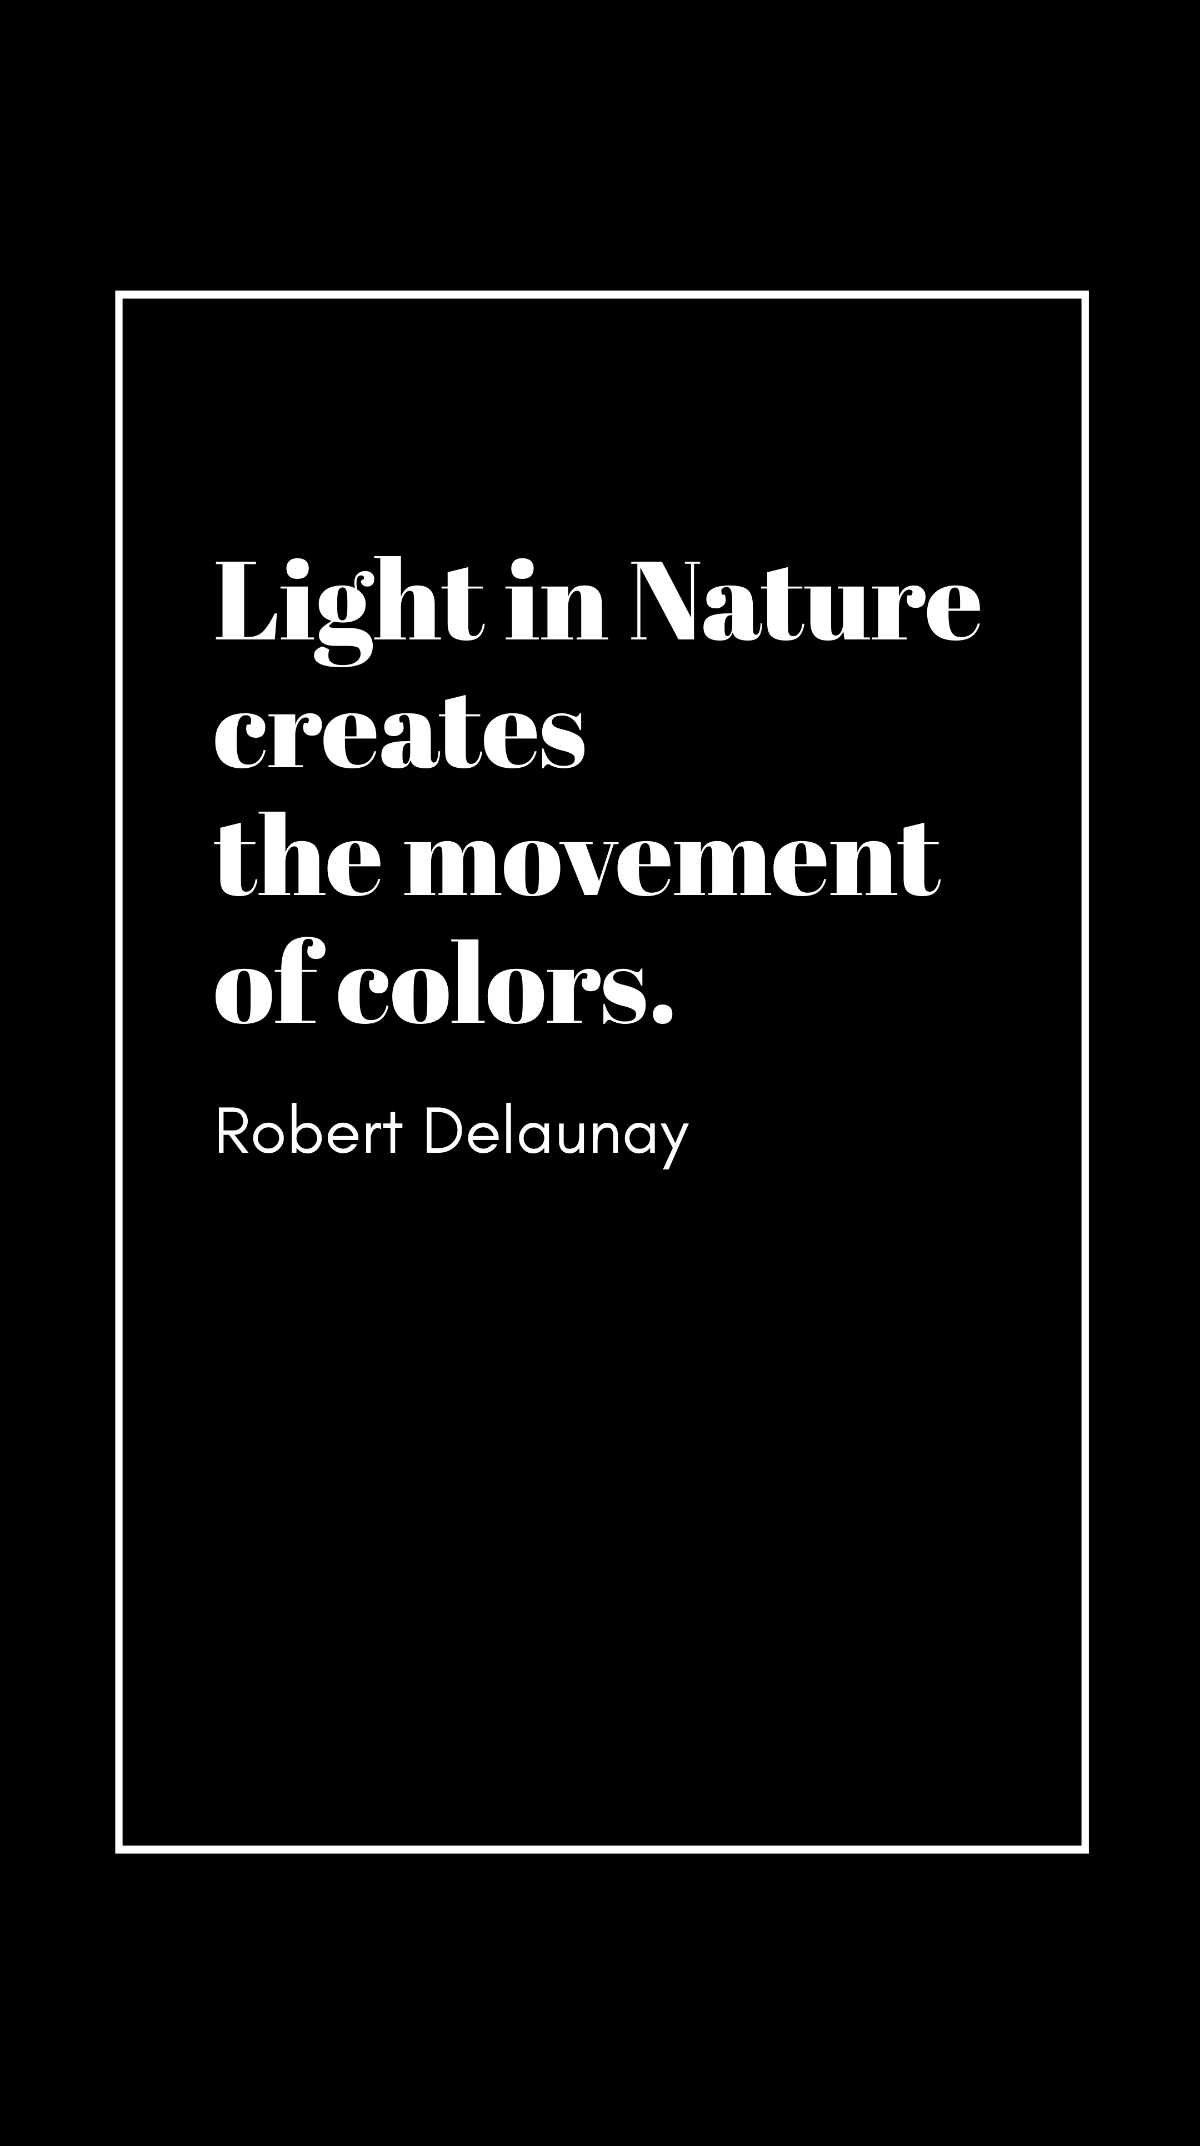 Free Robert Delaunay - Light in Nature creates the movement of colors. Template